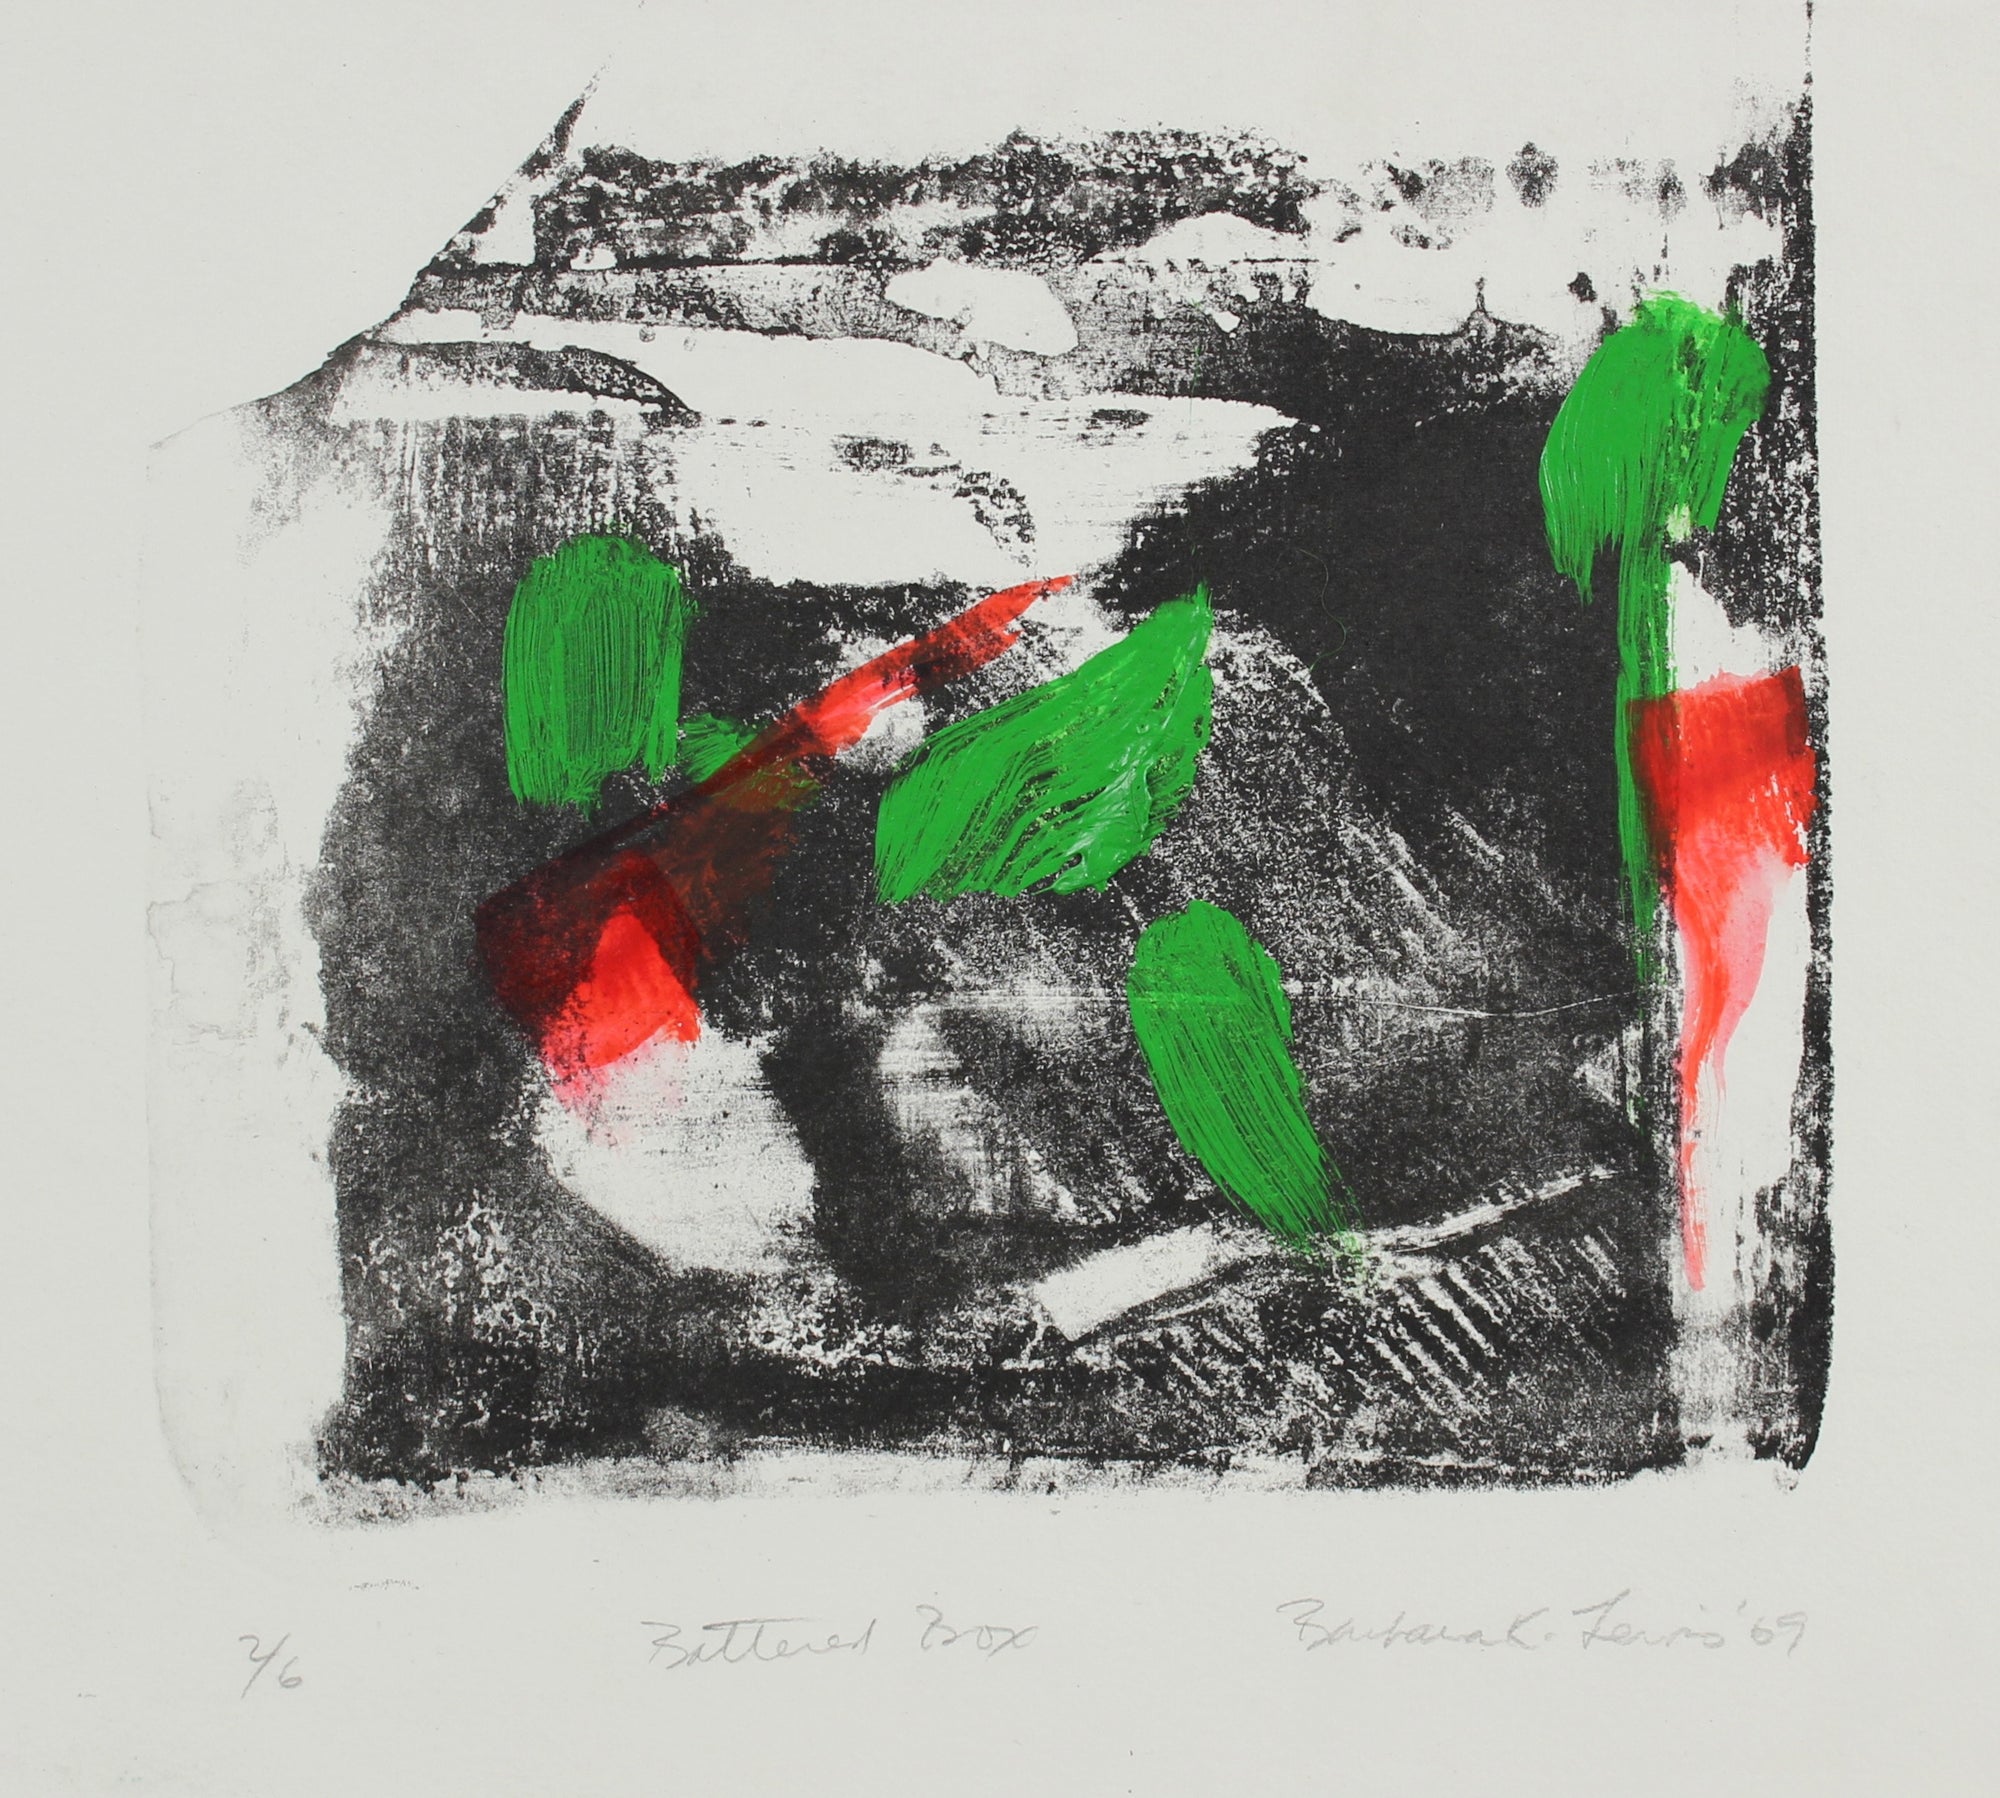 <I>Battered Box</I> <br>1969 Lithograph & Acrylic<br><br>#99069